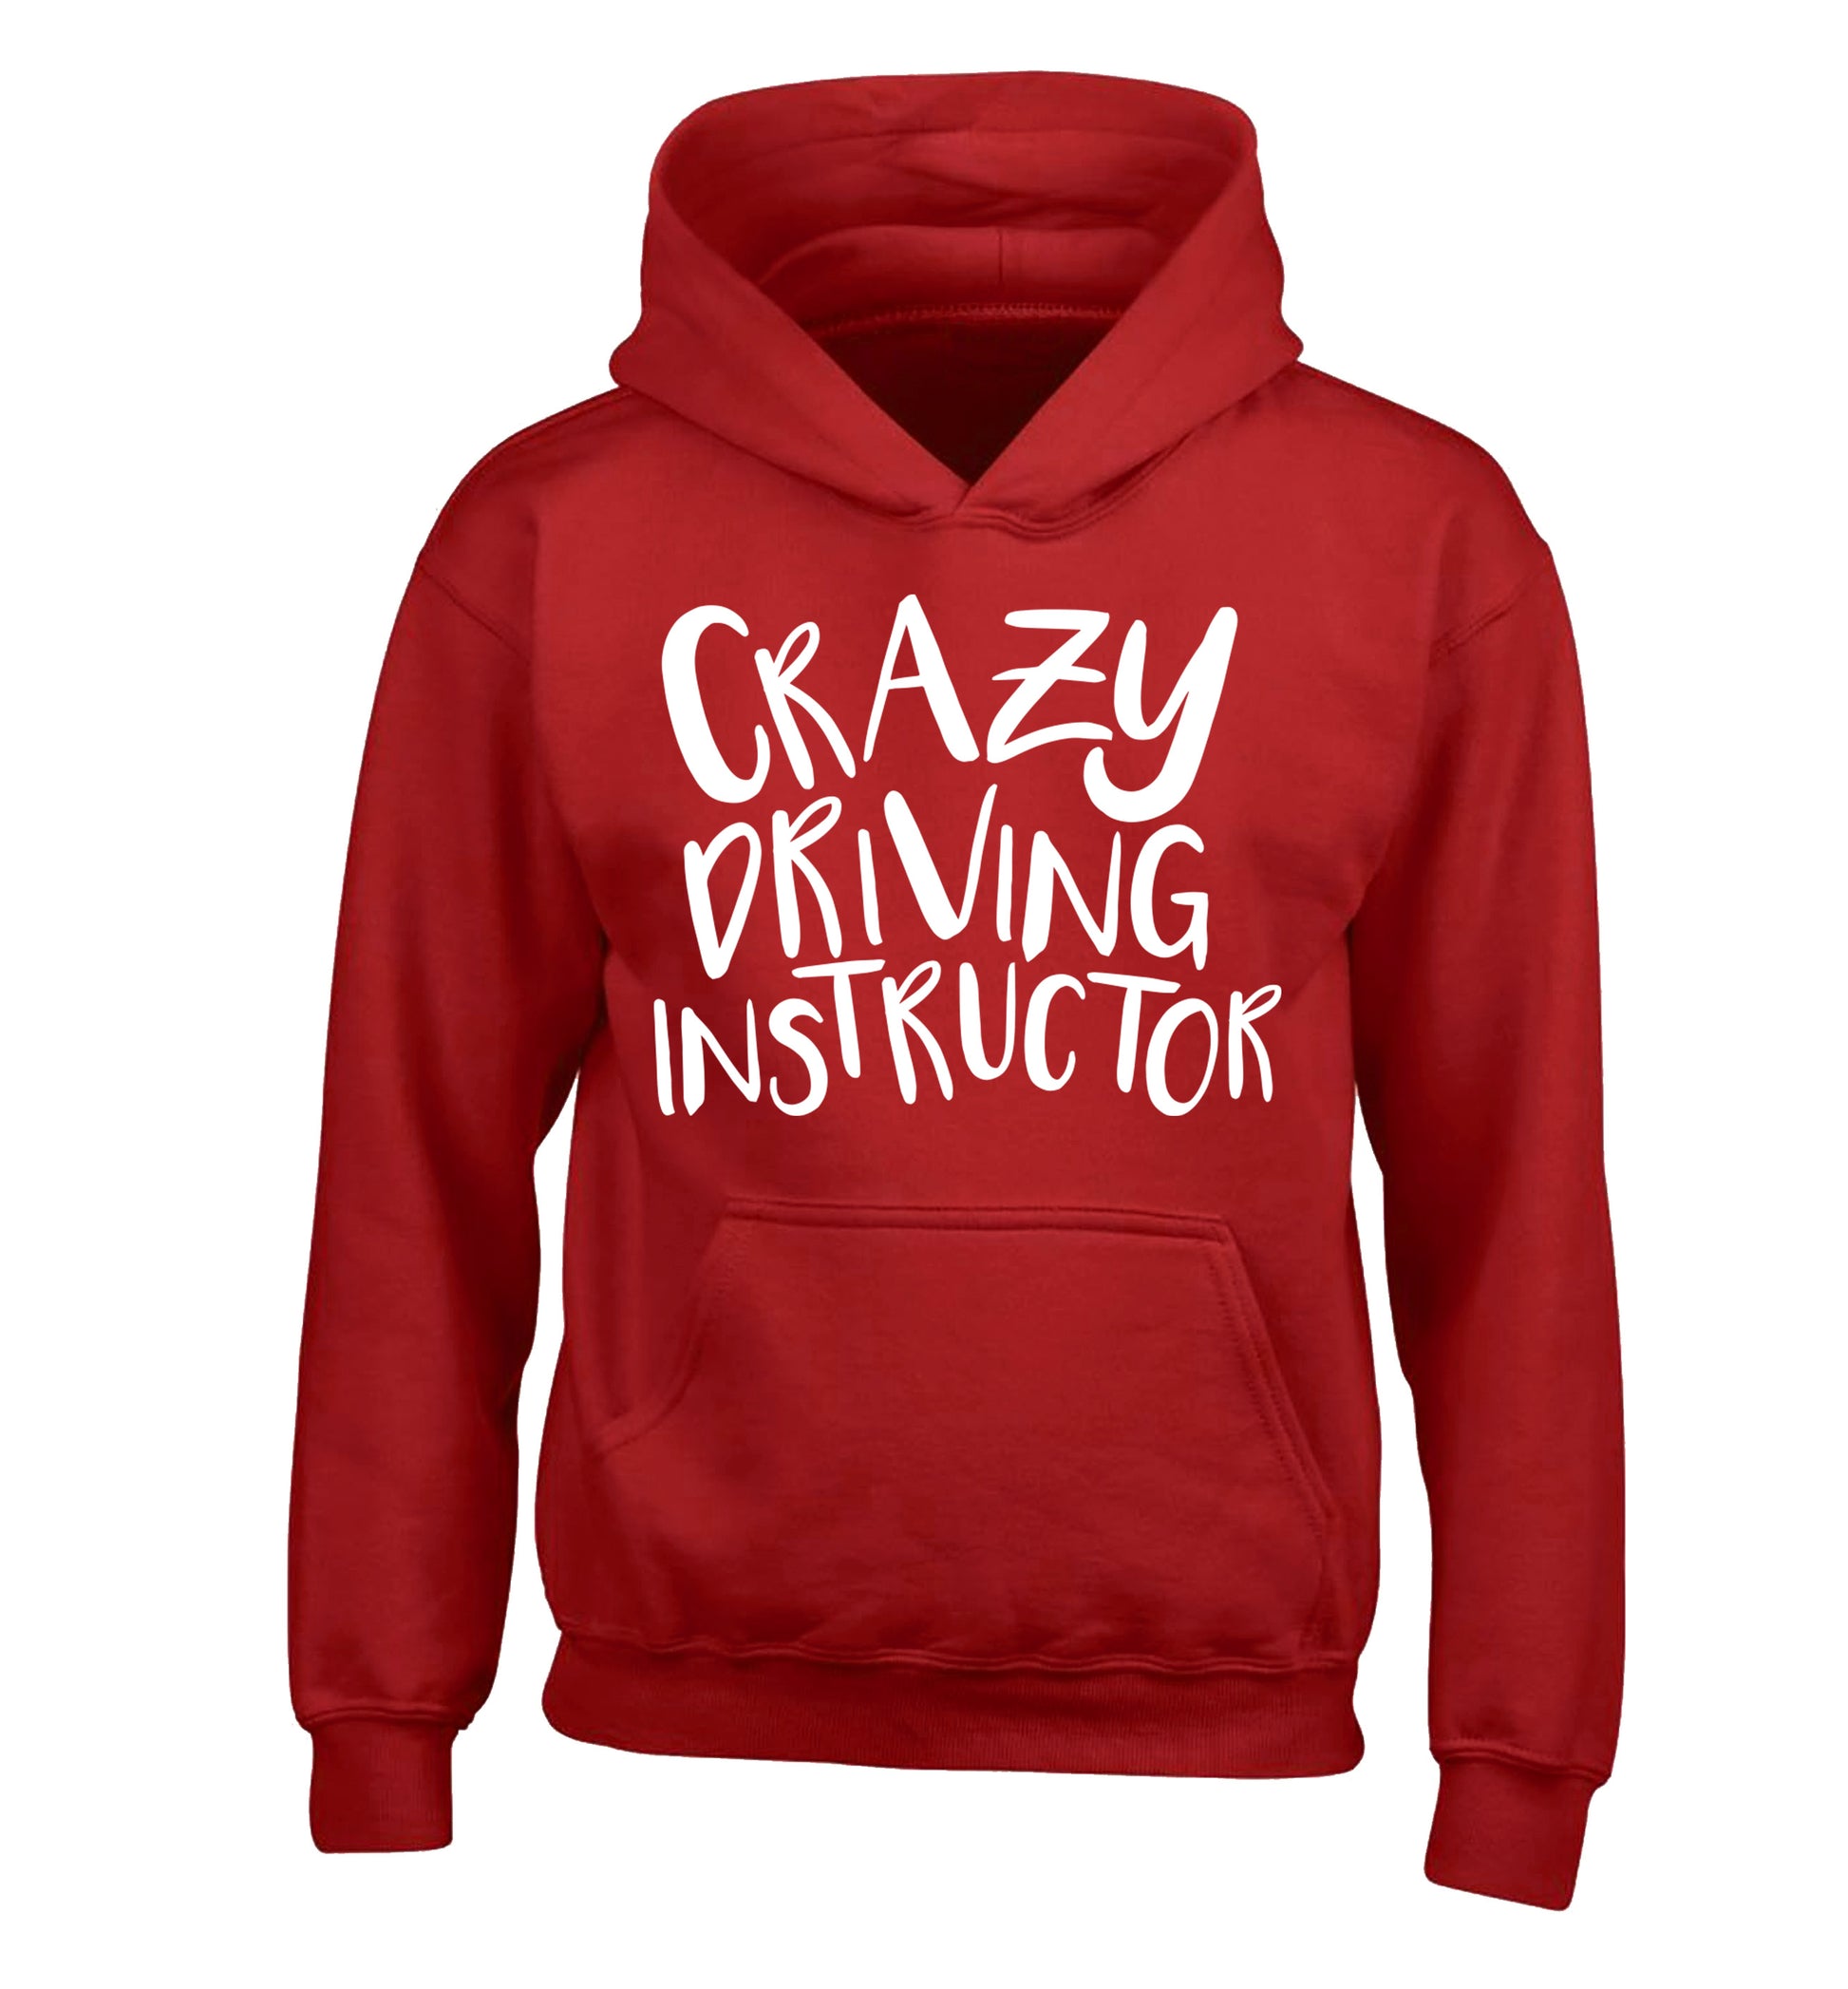 Crazy driving instructor children's red hoodie 12-13 Years